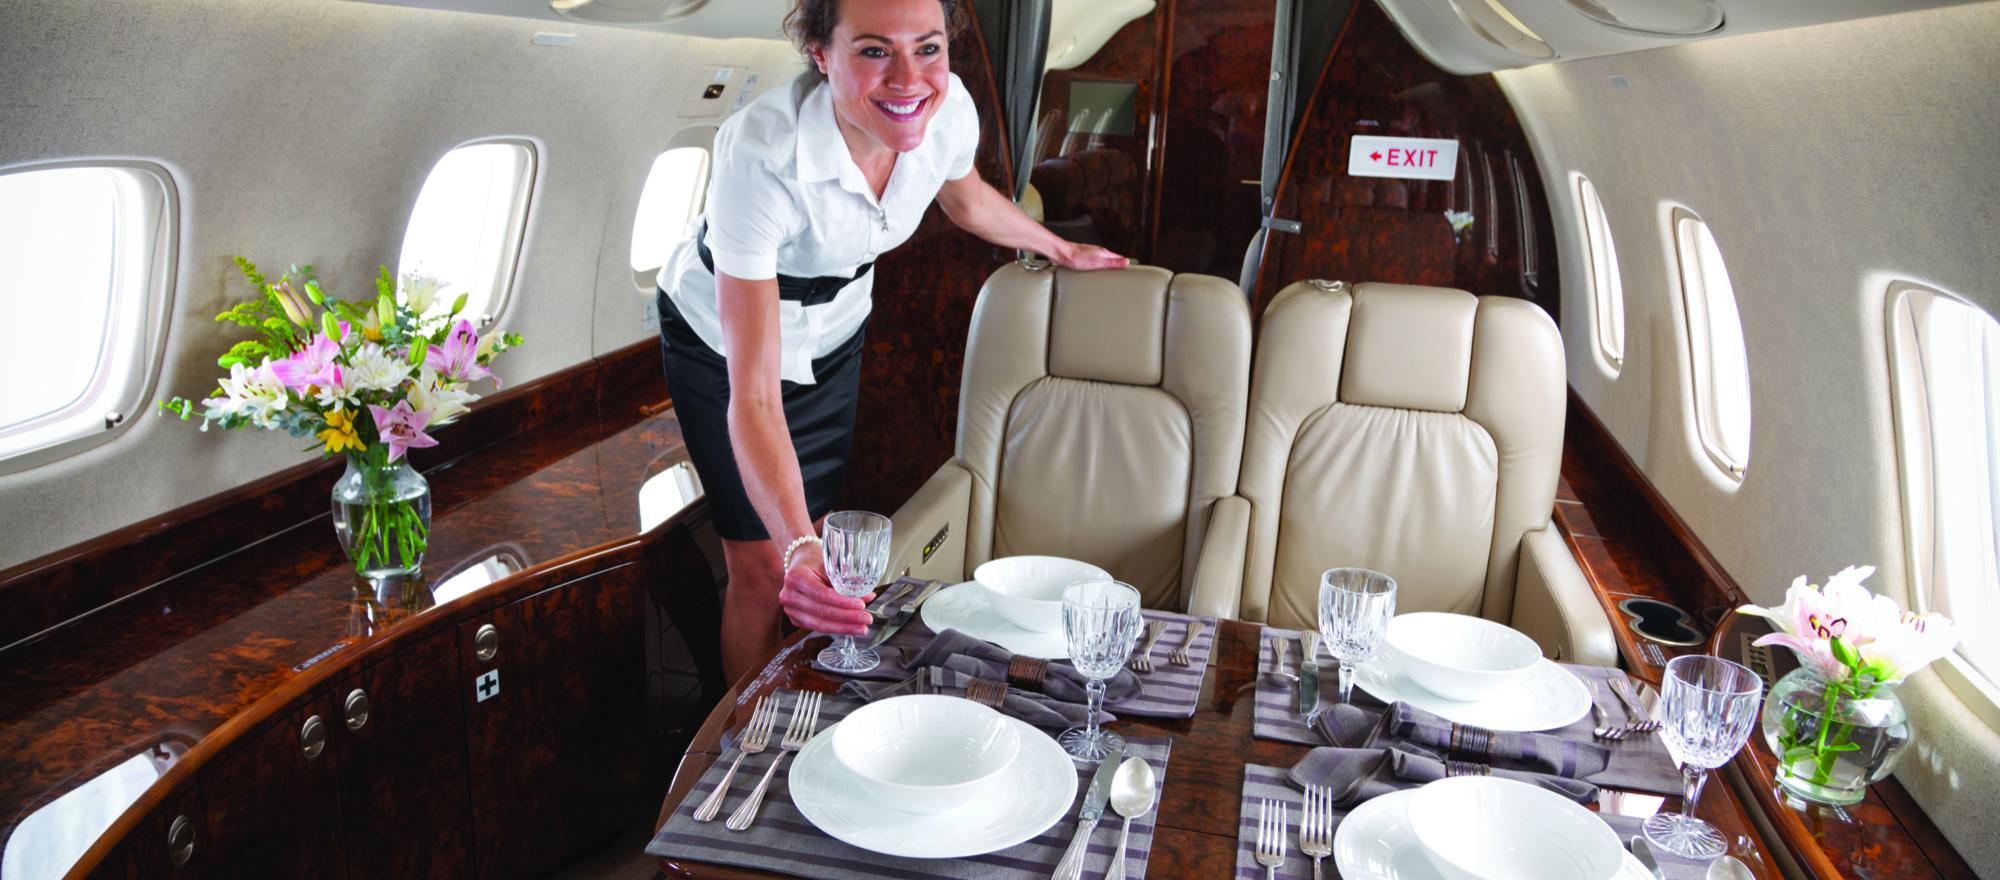 Flight attendants prepare and serve gourmet meals, help passengers navigate entertainment systems and provide life-saving help in an emergency. (Photo: TWC Aviation)